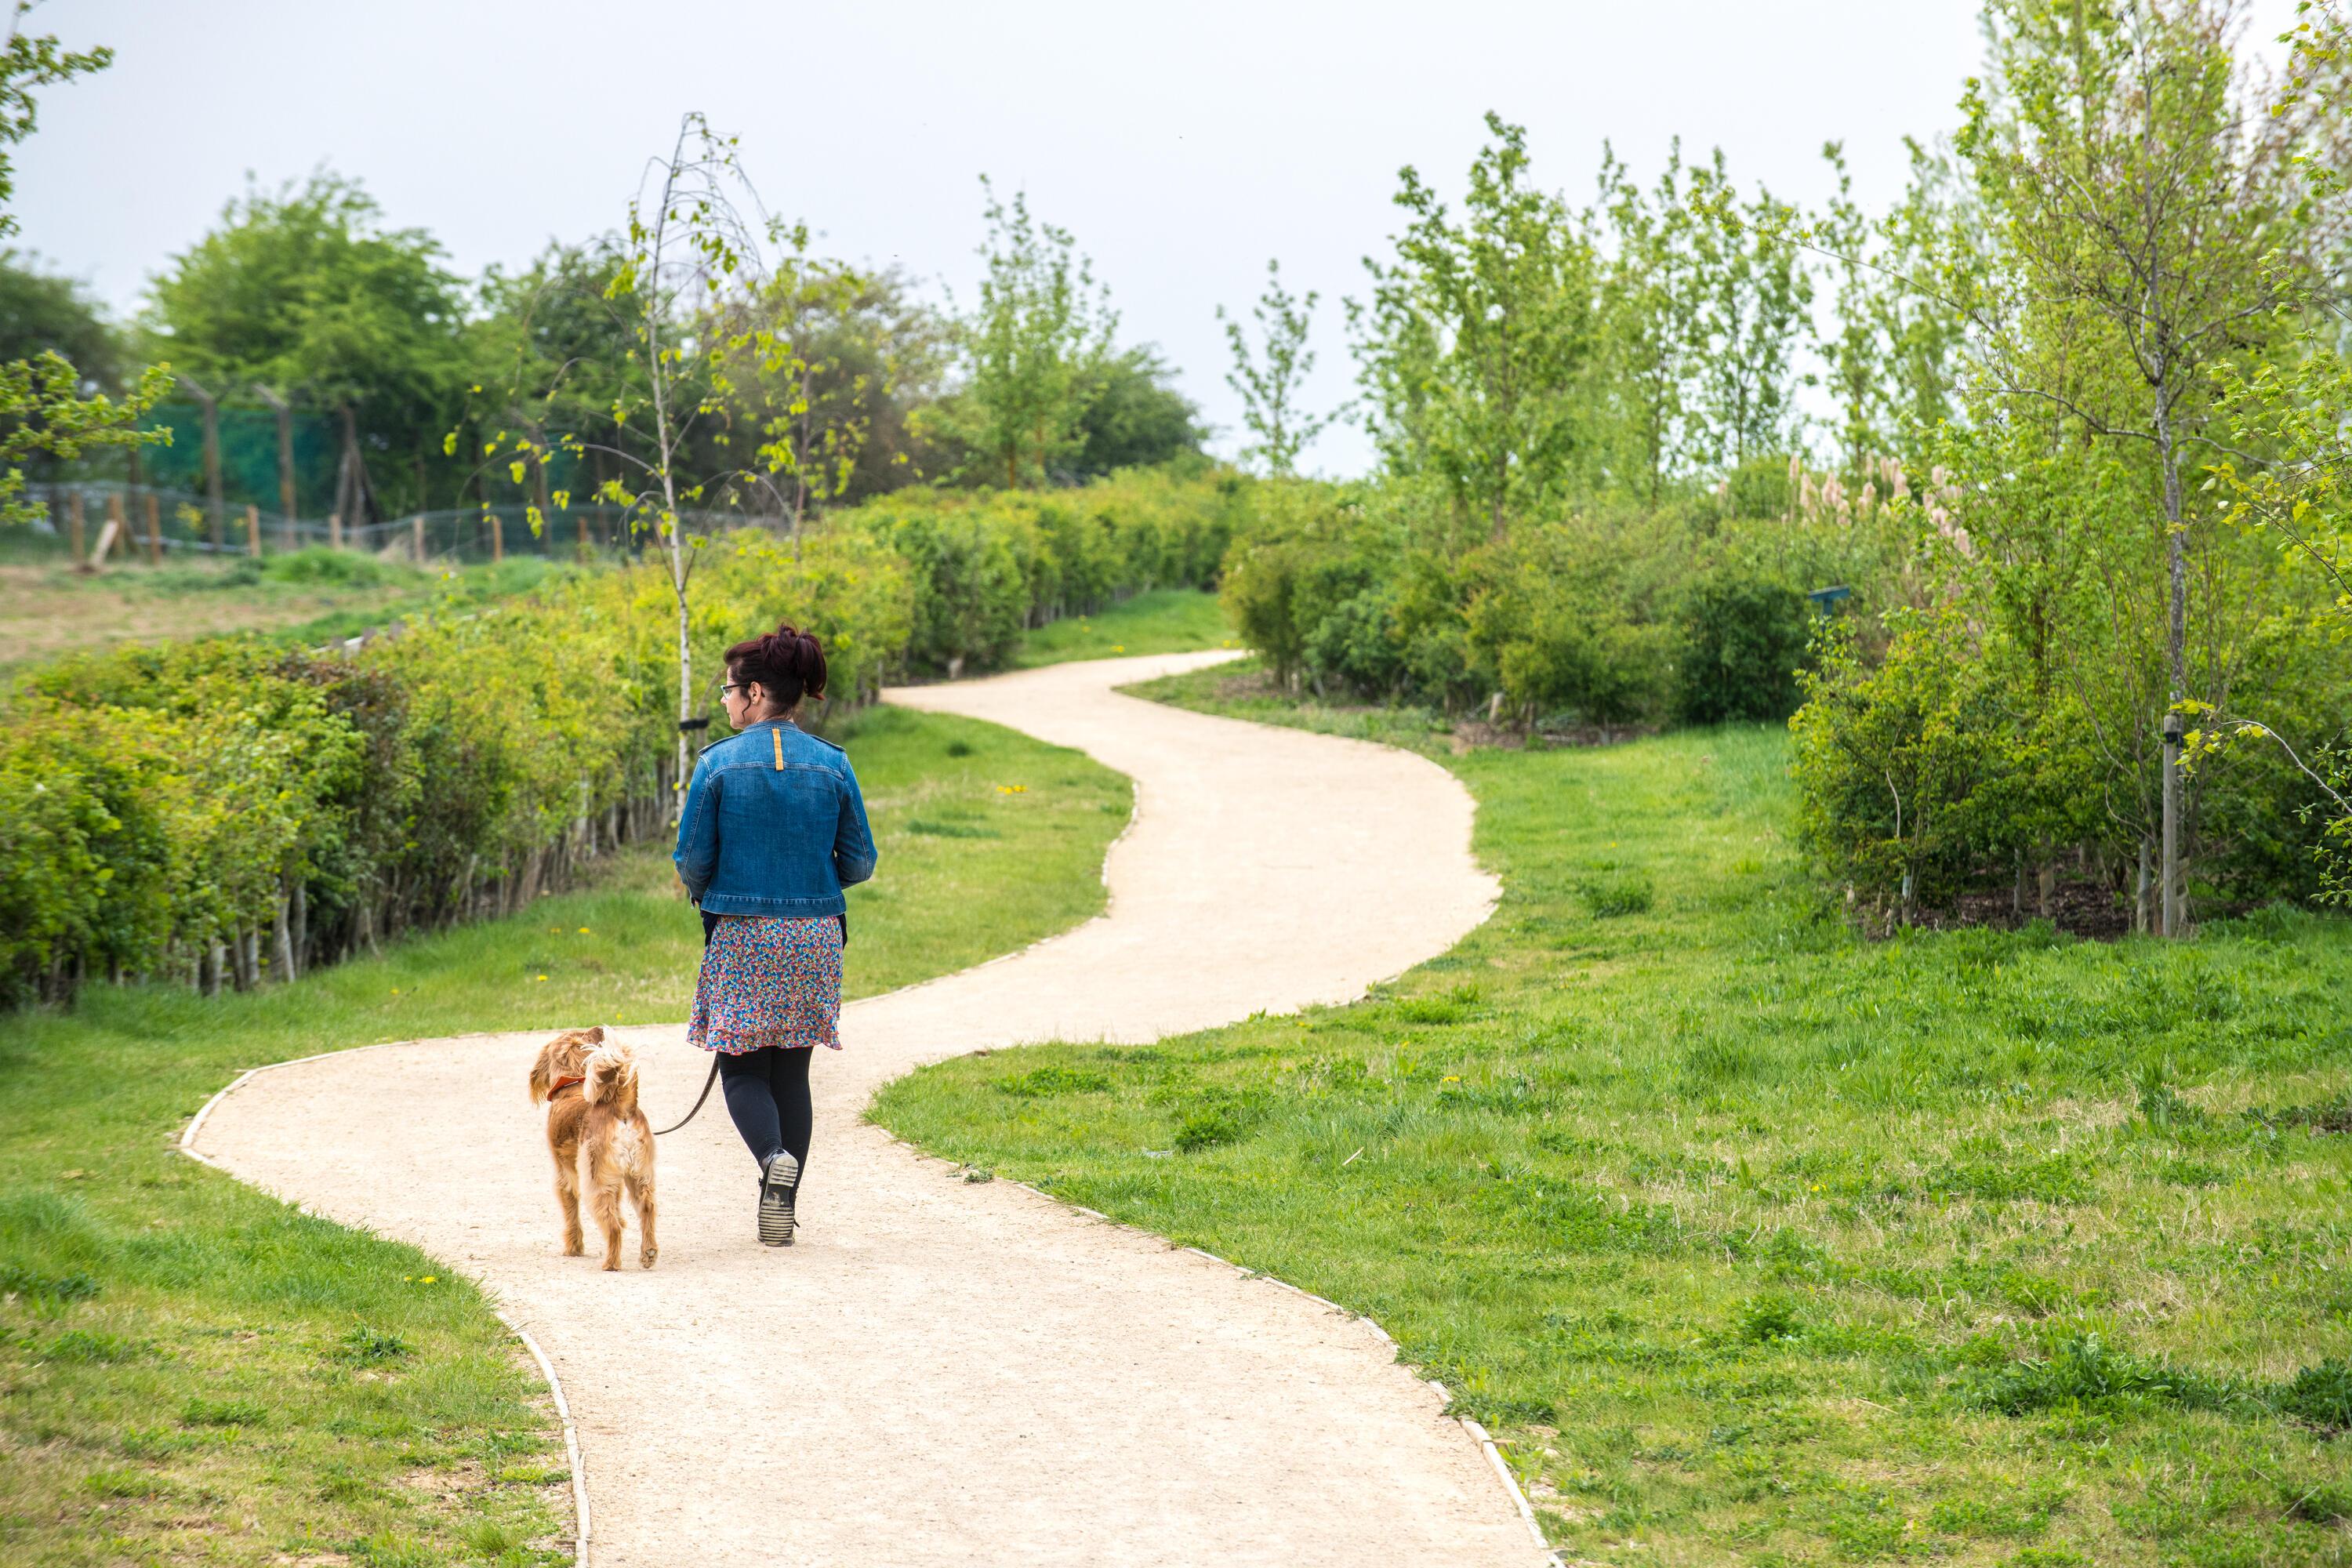 A photograph of a woman walking her dog through a wildlife corridor with shrubs and trees.